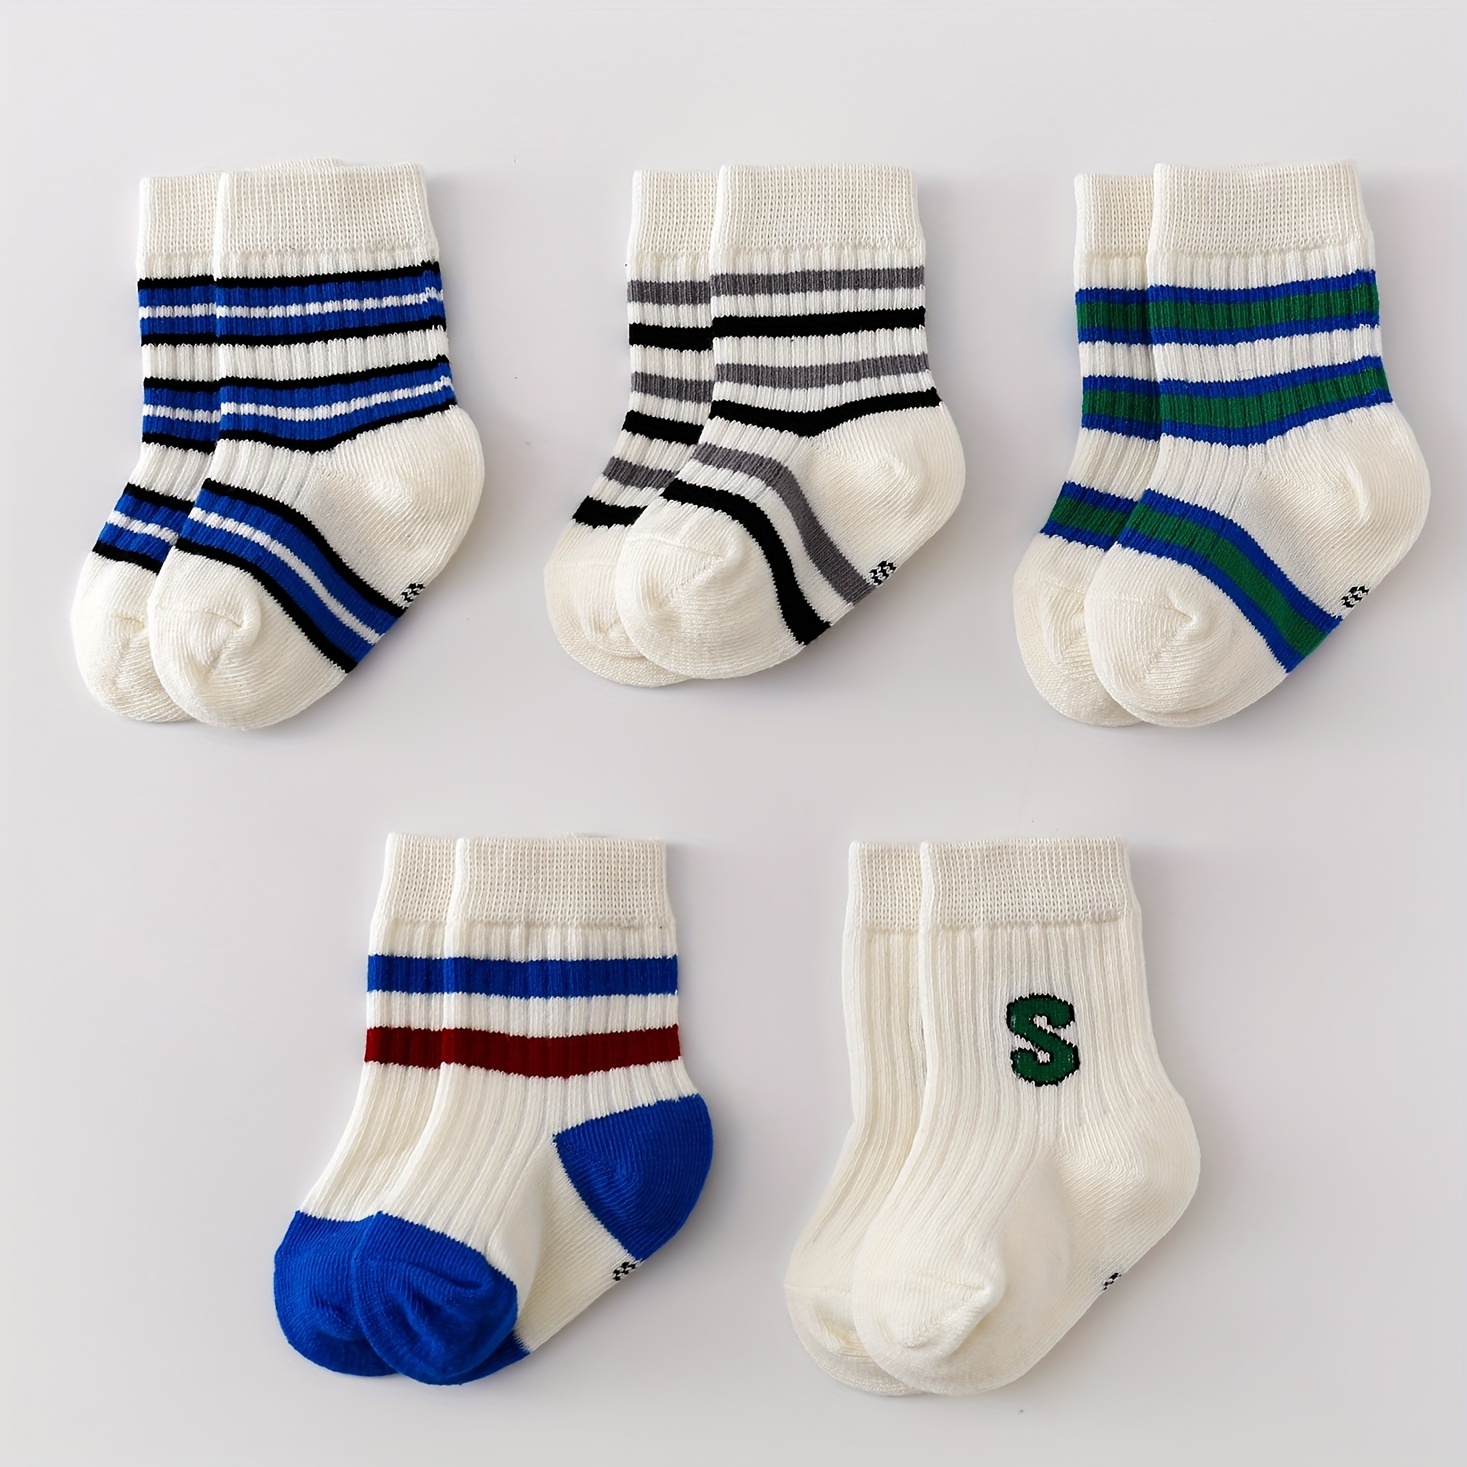 

5 Pairs Of Kid's Cotton Blend Fashion Cute Pattern Crew Socks, Comfy Breathable Soft Casual Socks For All Seasons Wearing